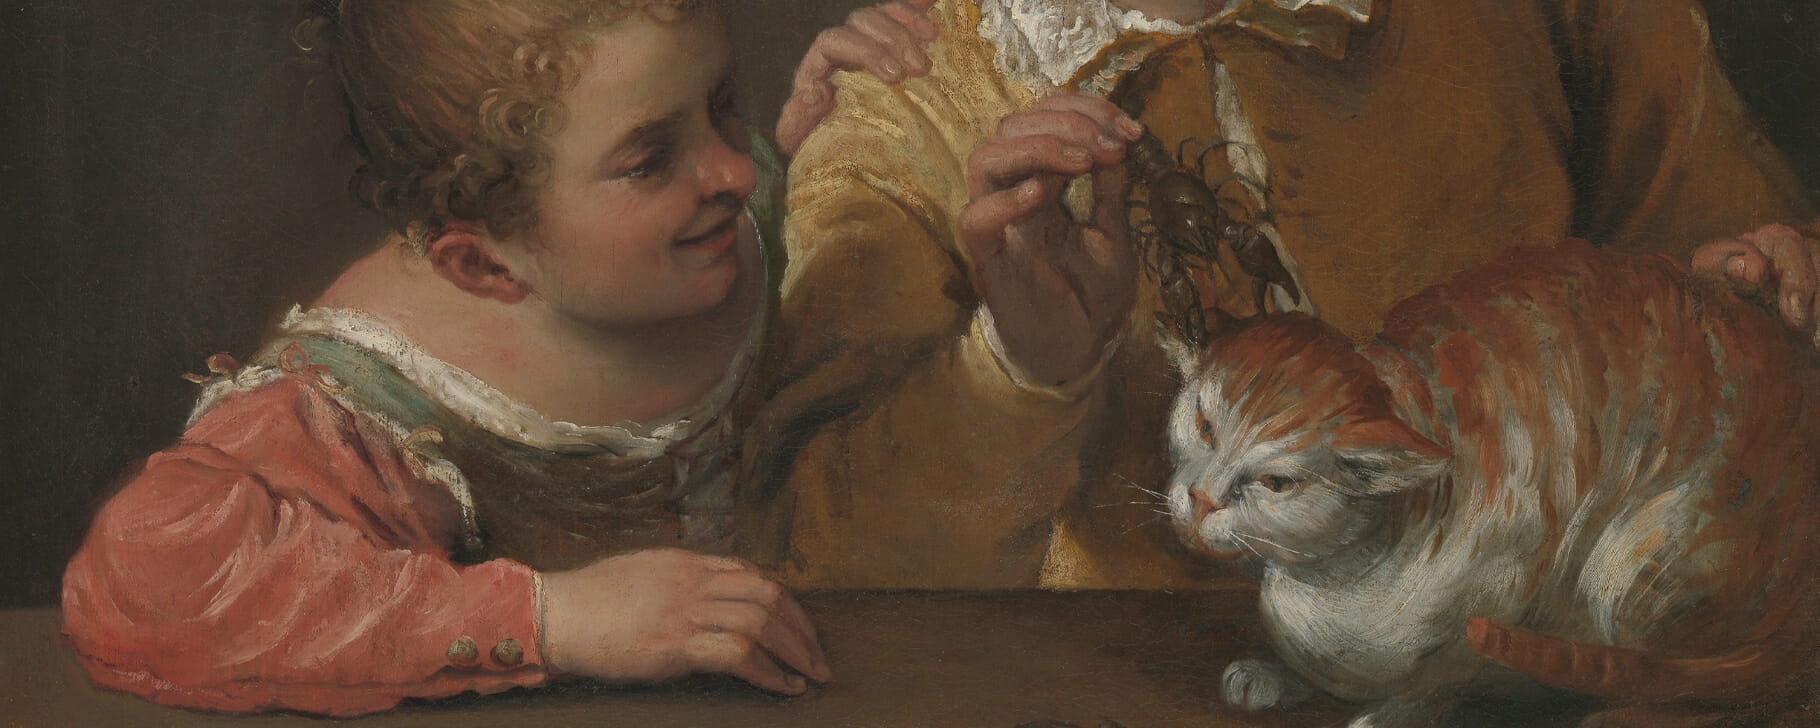 Cats in art detail